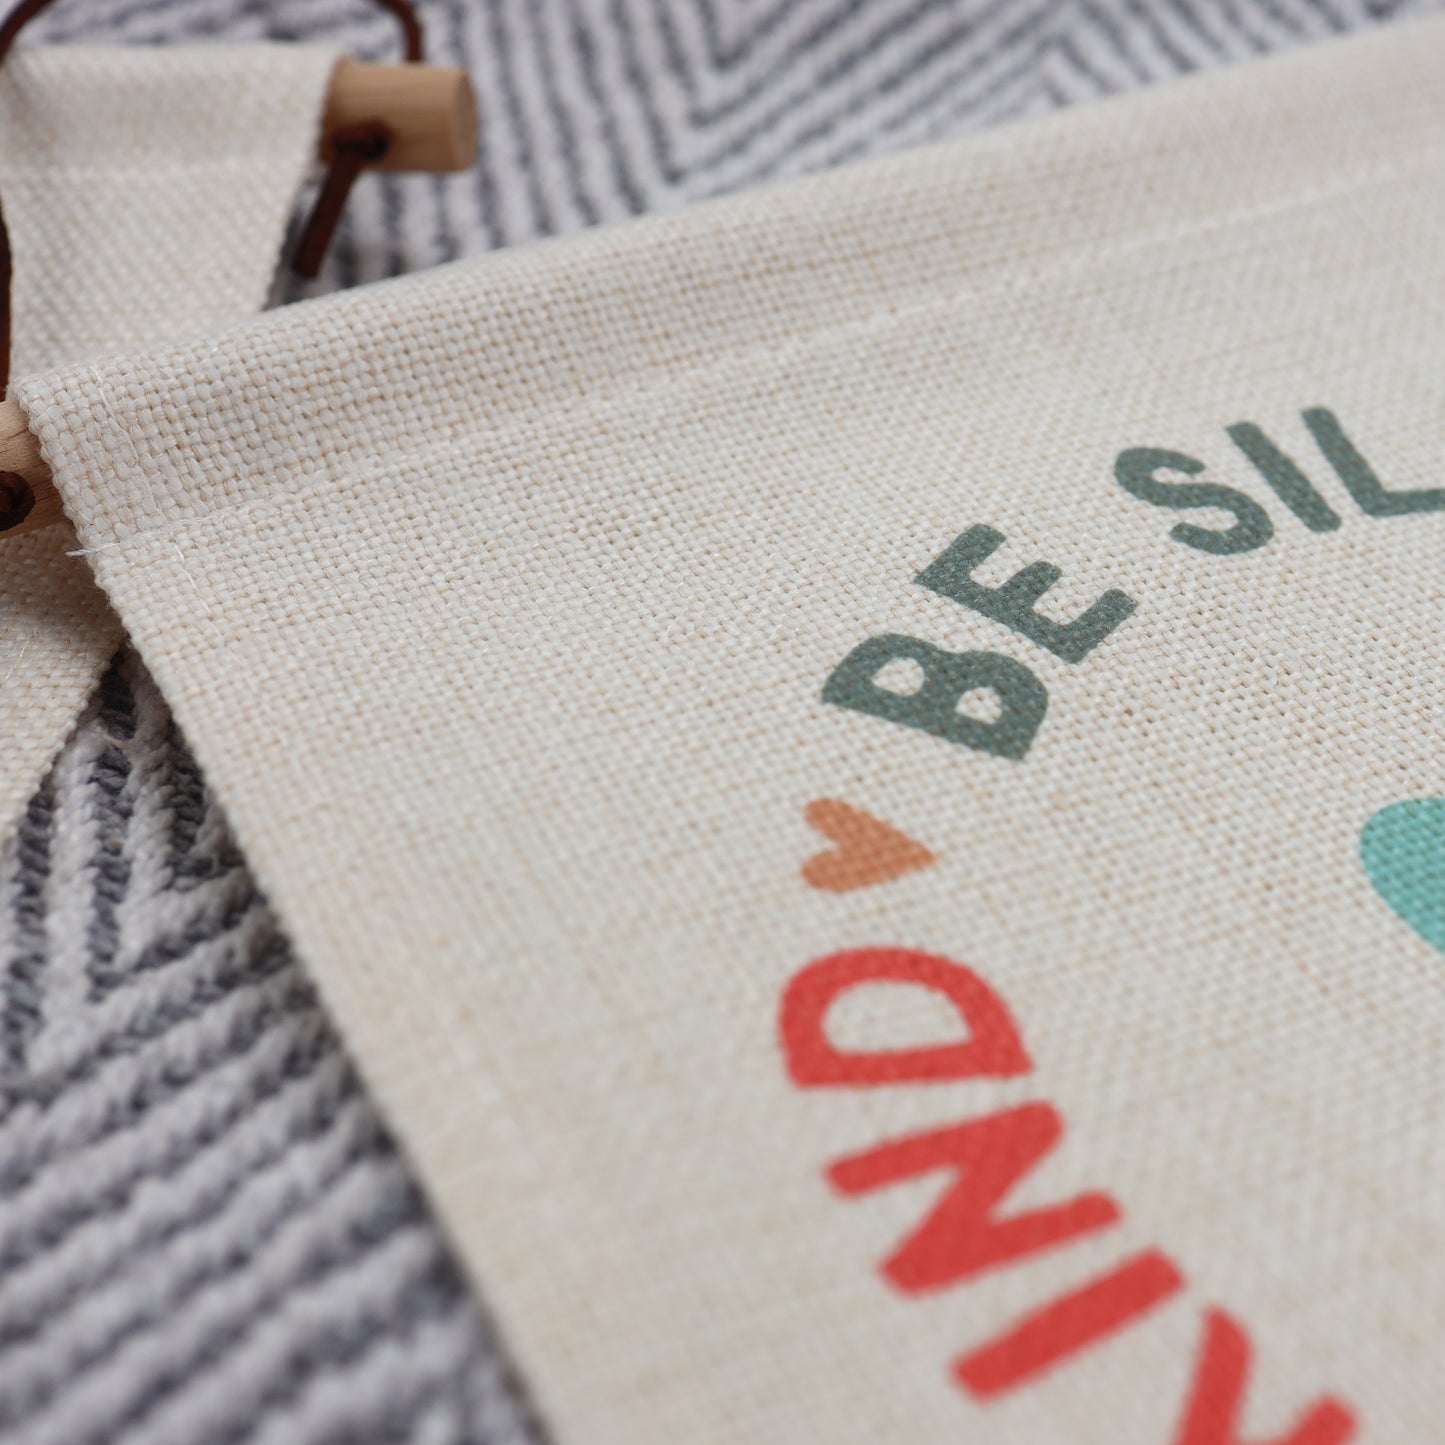 BE SILLY, BE HONEST, BE KIND Linen Pennant